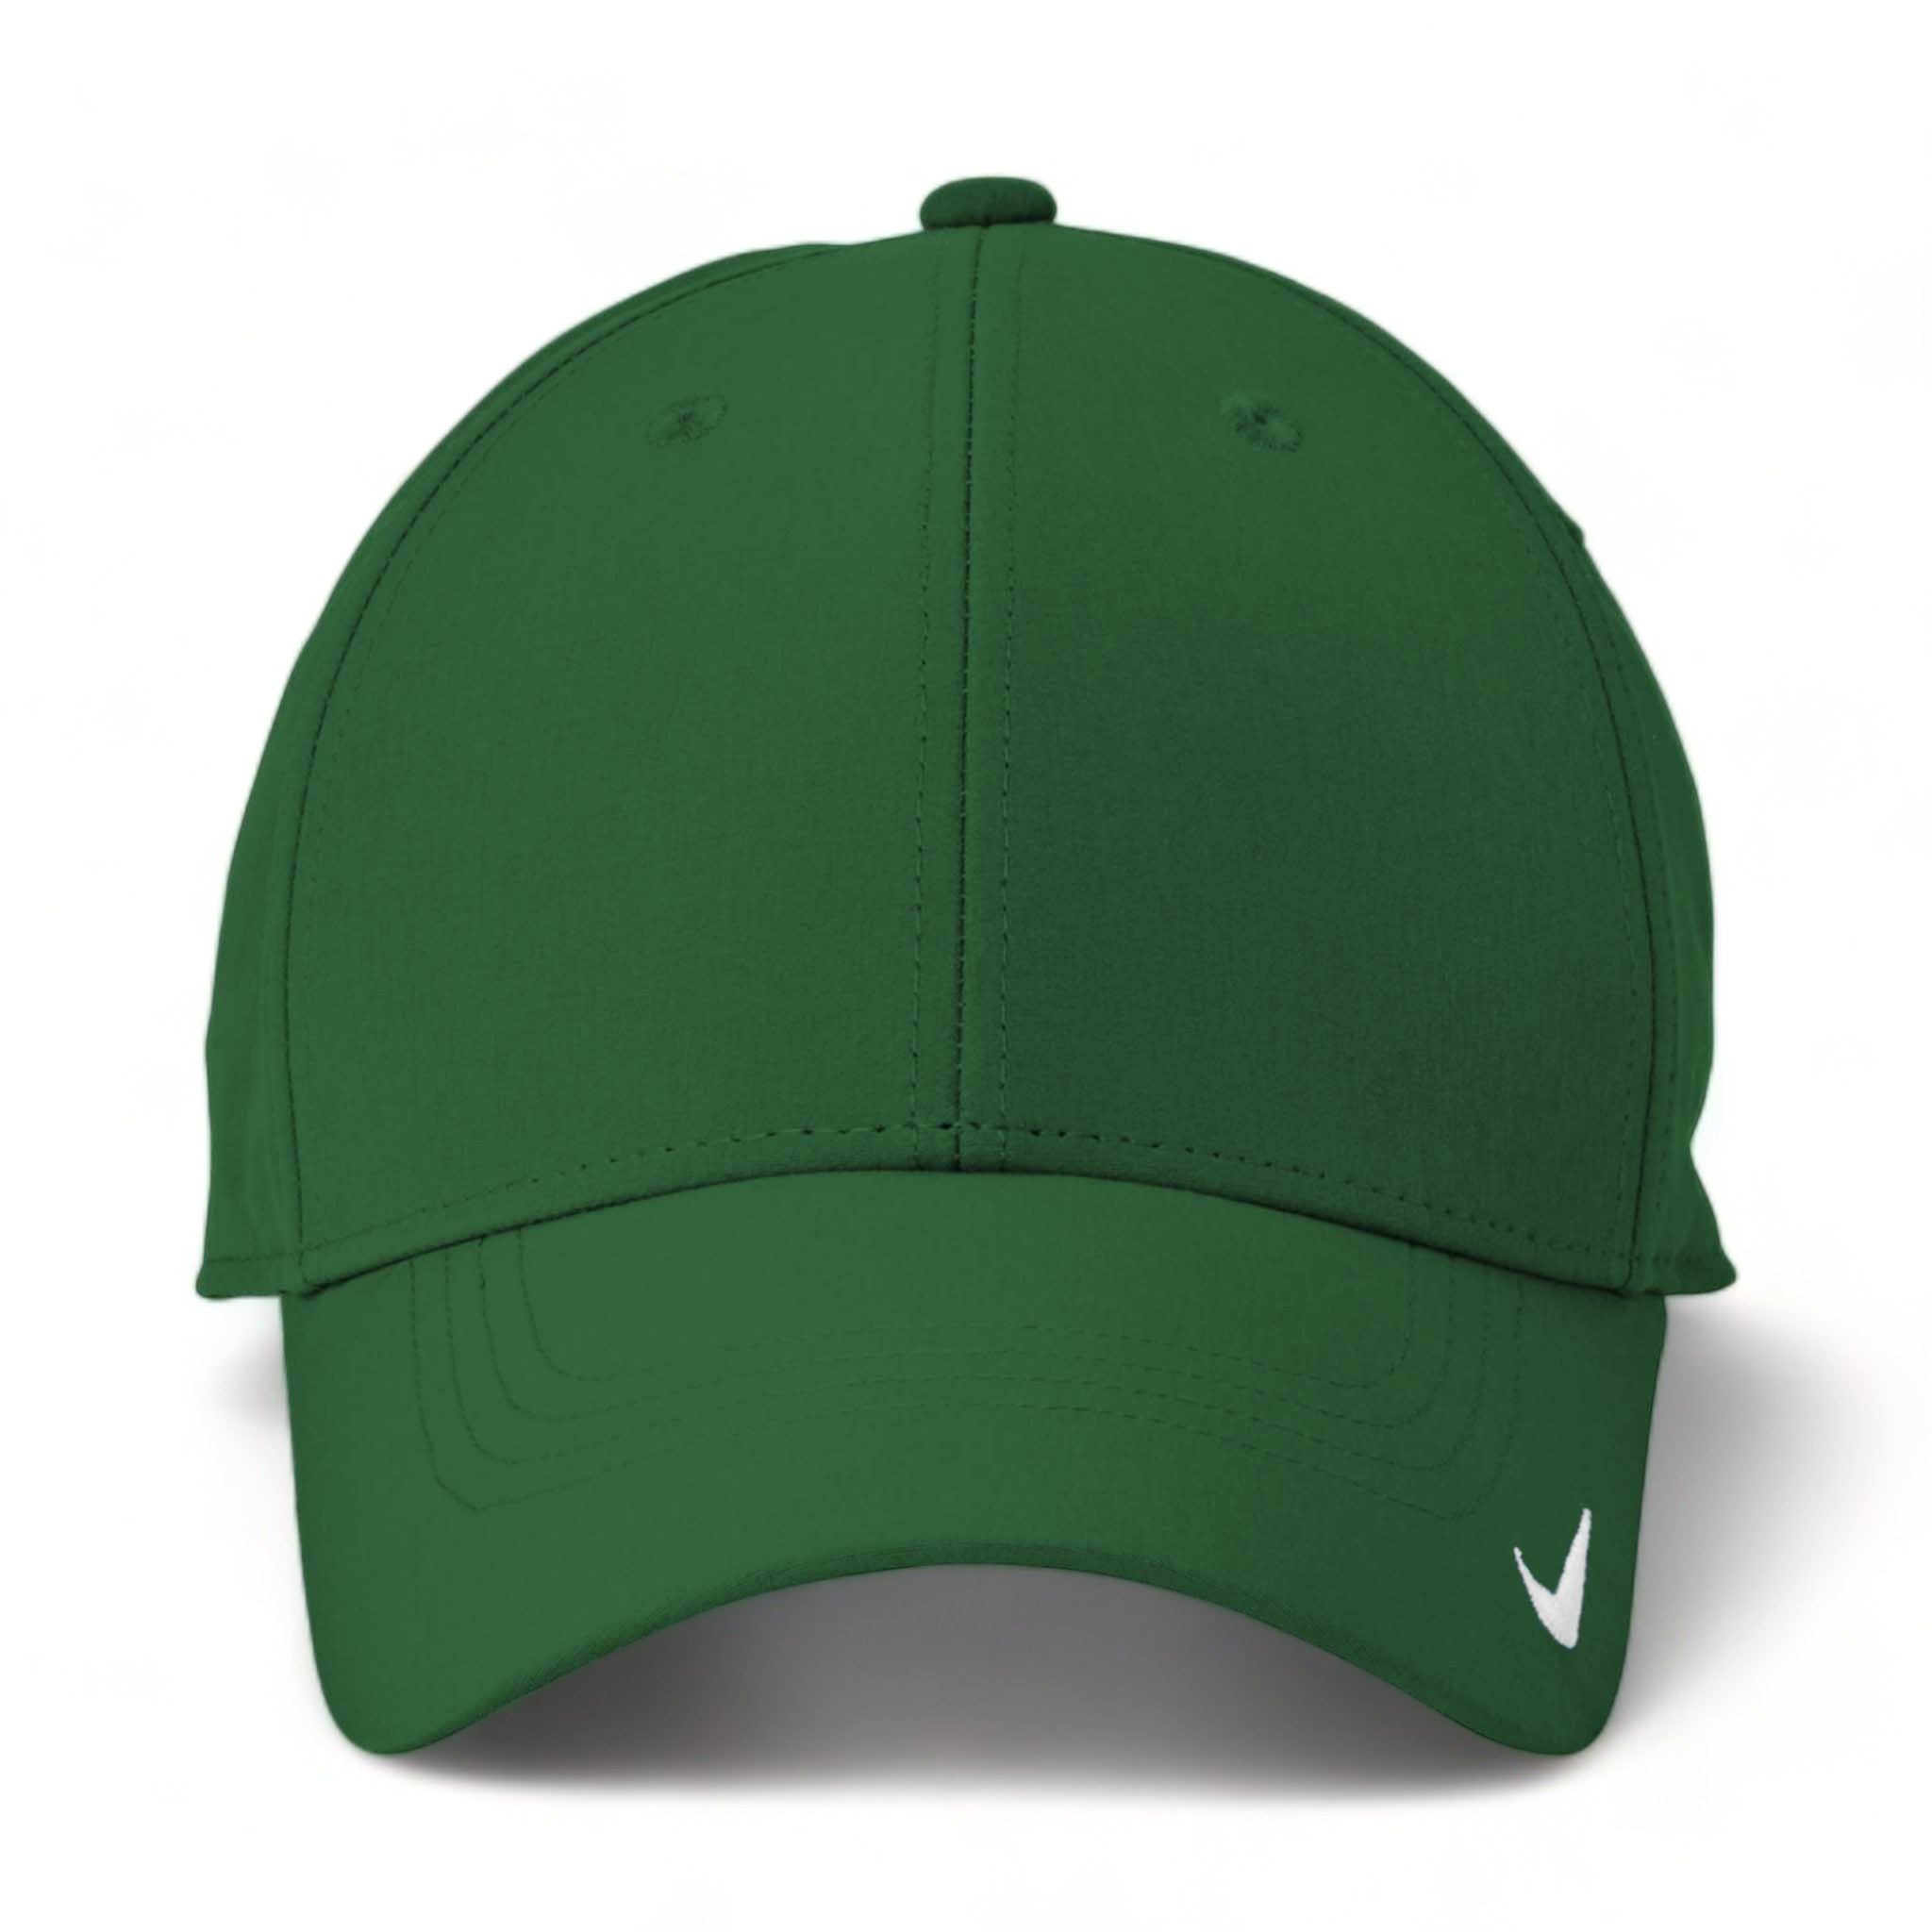 Front view of Nike NKFB6447 custom hat in gorge green